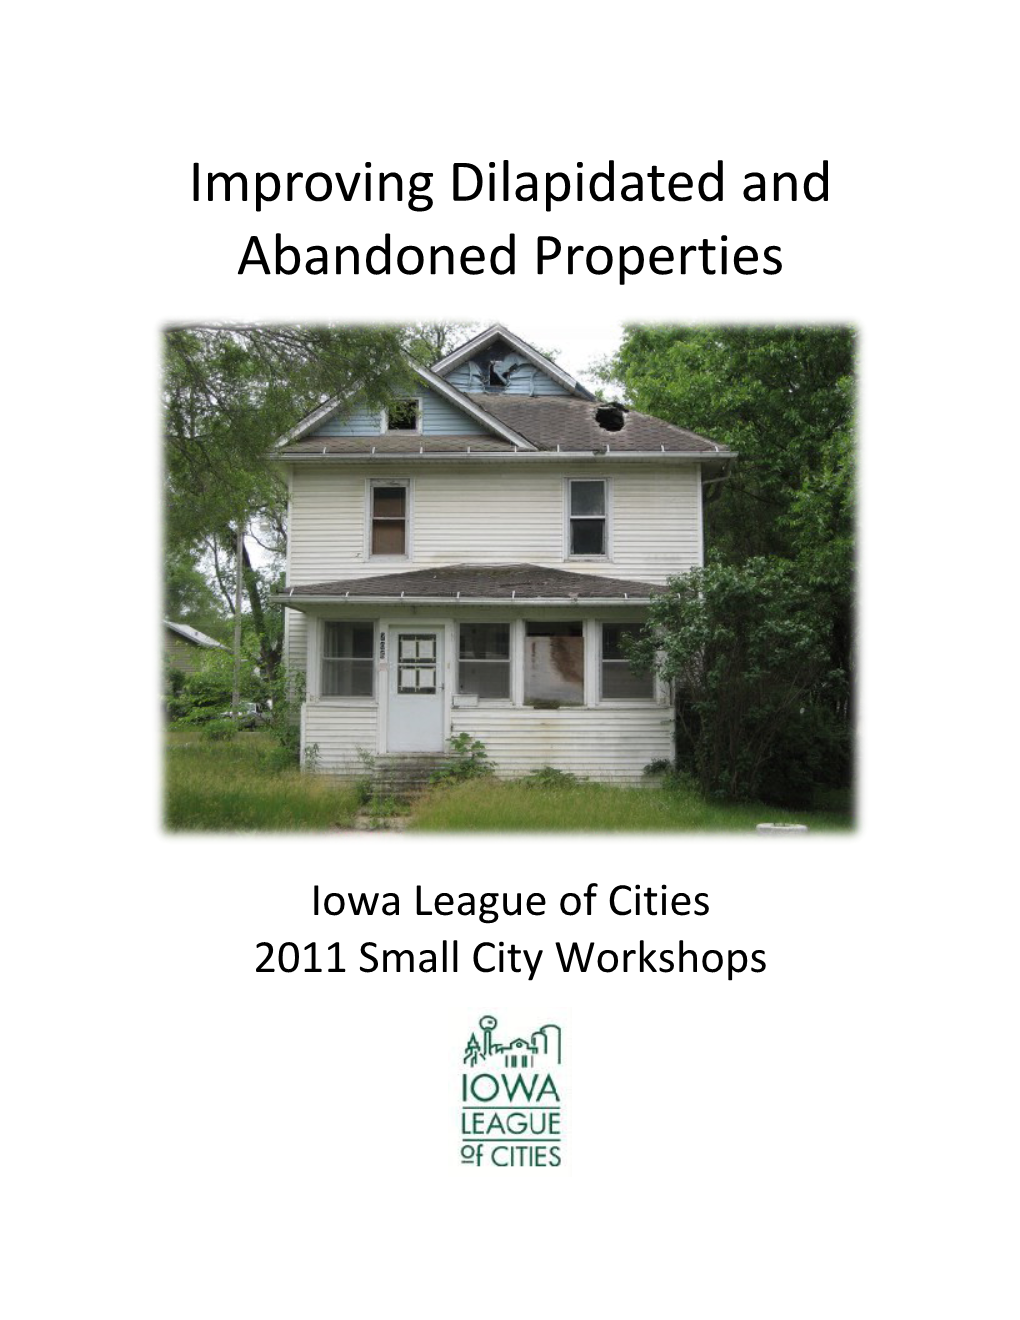 Improving Dilapidated And Abandoned Properties